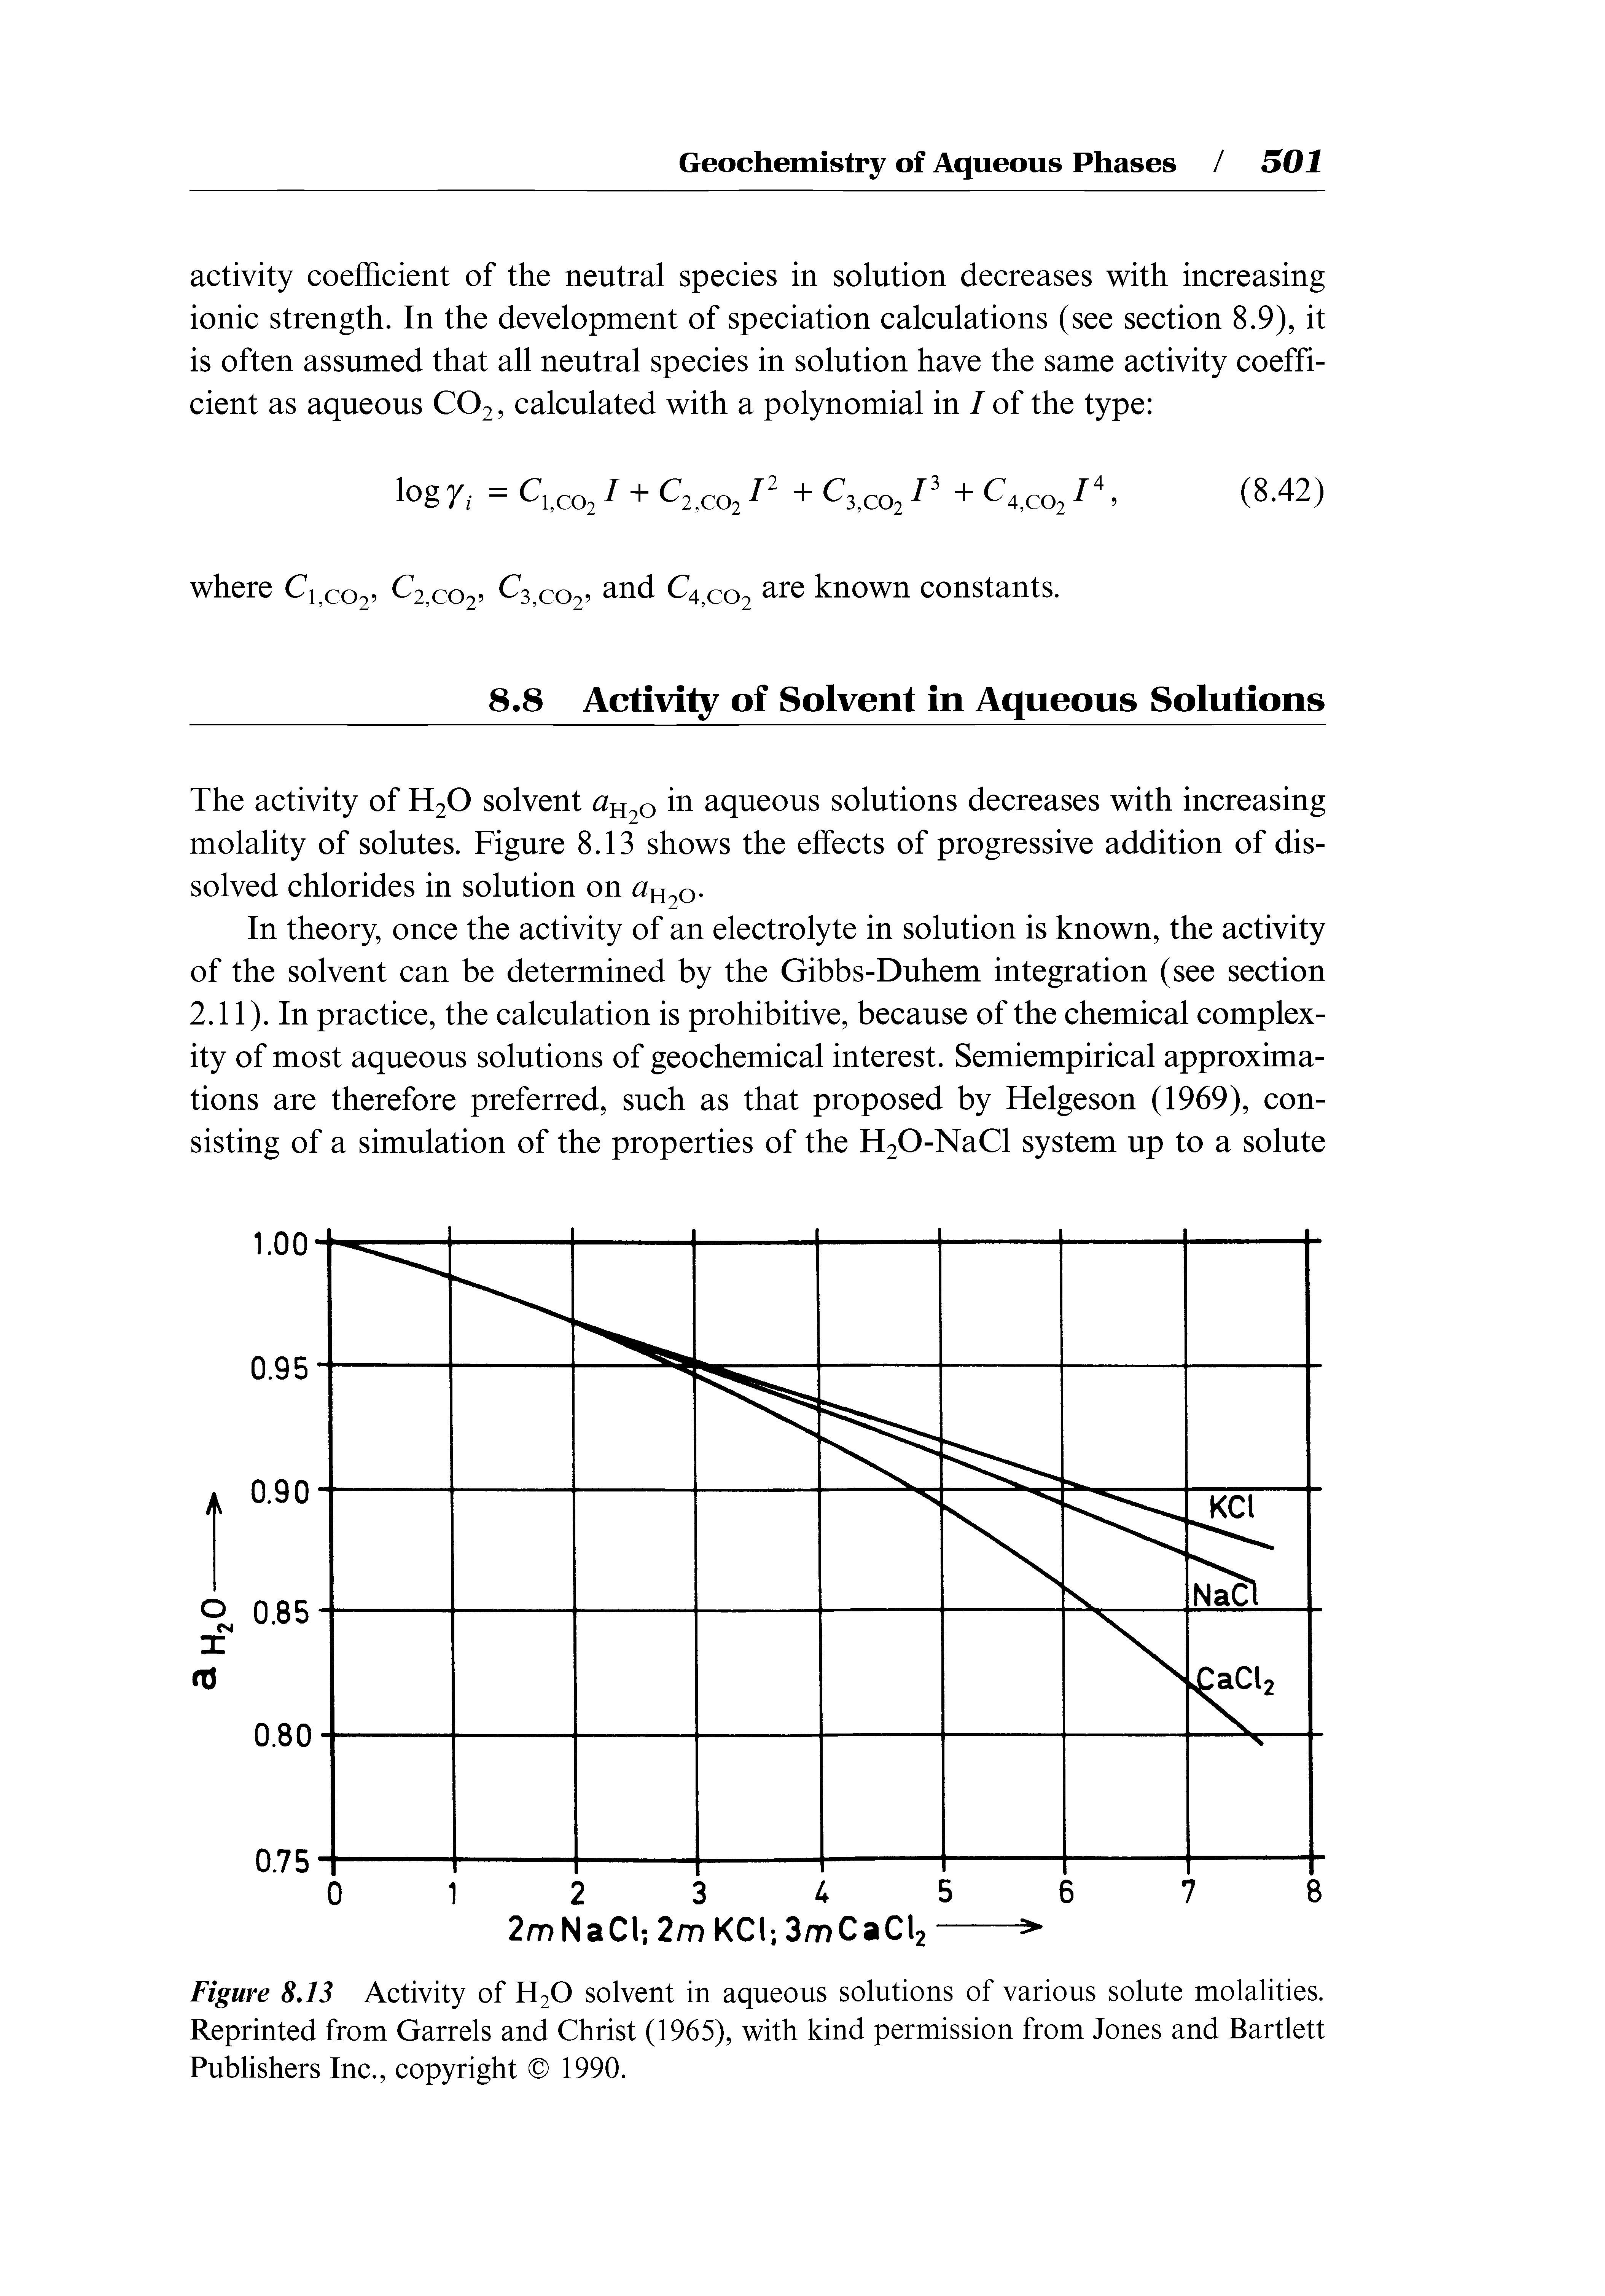 Figure 8,13 Activity of H2O solvent in aqueous solutions of various solute molalities. Reprinted from Garrels and Christ (1965), with kind permission from Jones and Bartlett Publishers Inc., copyright 1990.